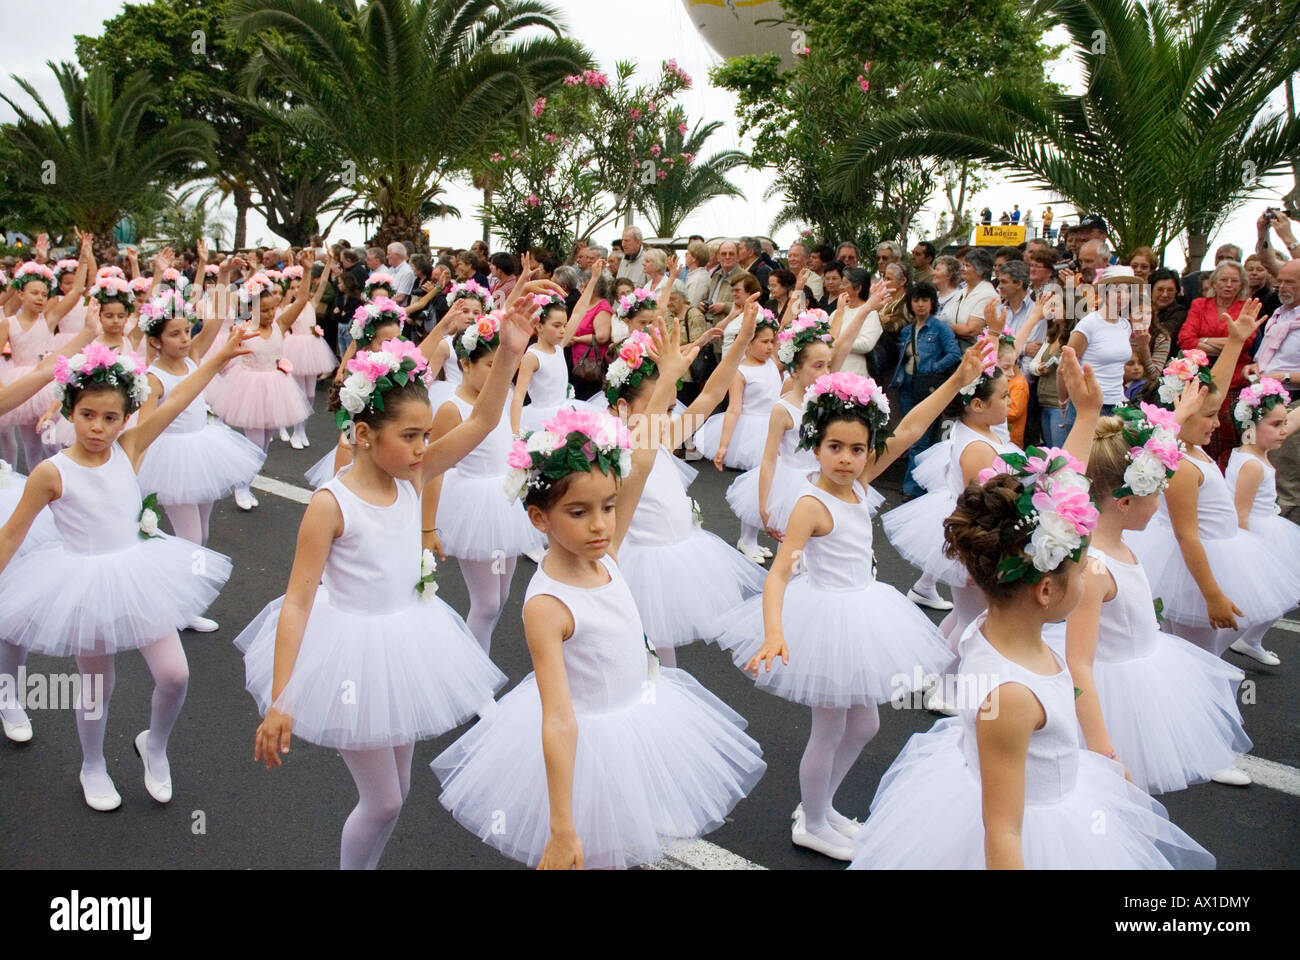 Ballet troupe interpreting Swan Lake during April Flower Festival in Funchal, Madeira, Portugal, Europe Stock Photo